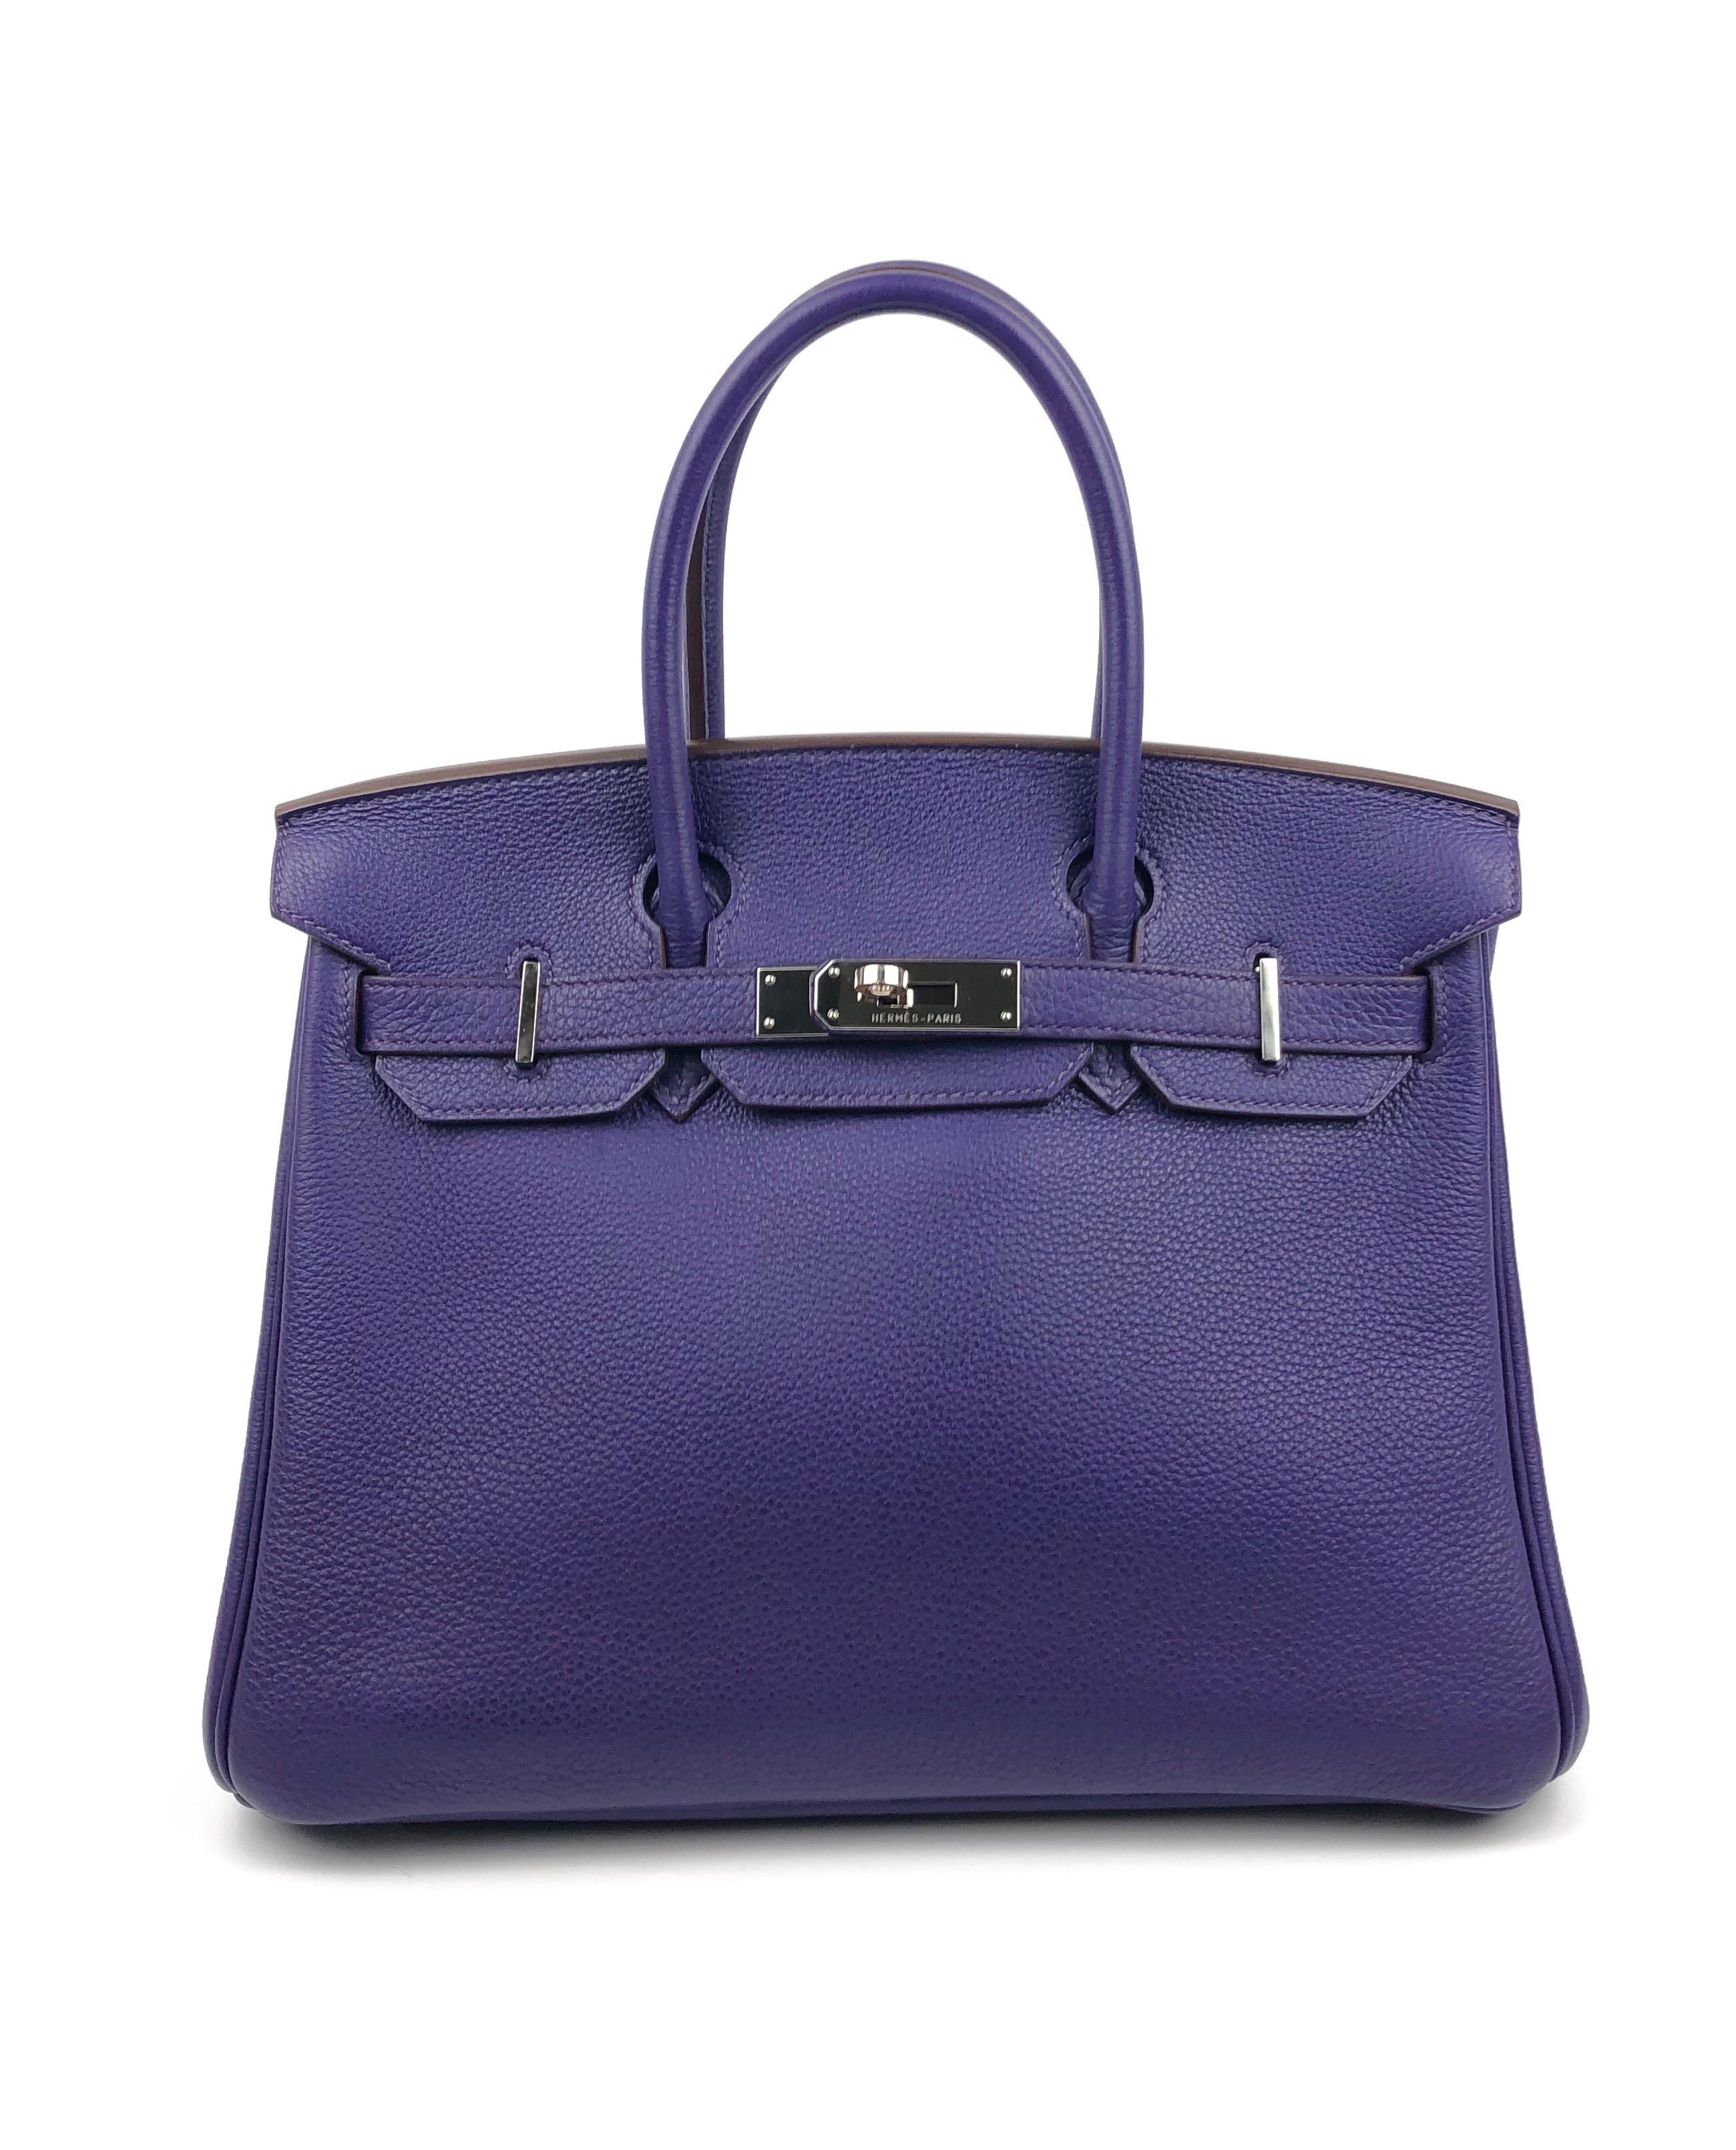 Hermes Birkin 30 ultraviolet purple Palladium Hardware. Excellent condition, light hairlines on hardware, perfect corners and excellent structure.

Shop with Confidence from Lux Addicts. Authenticity Guaranteed! 